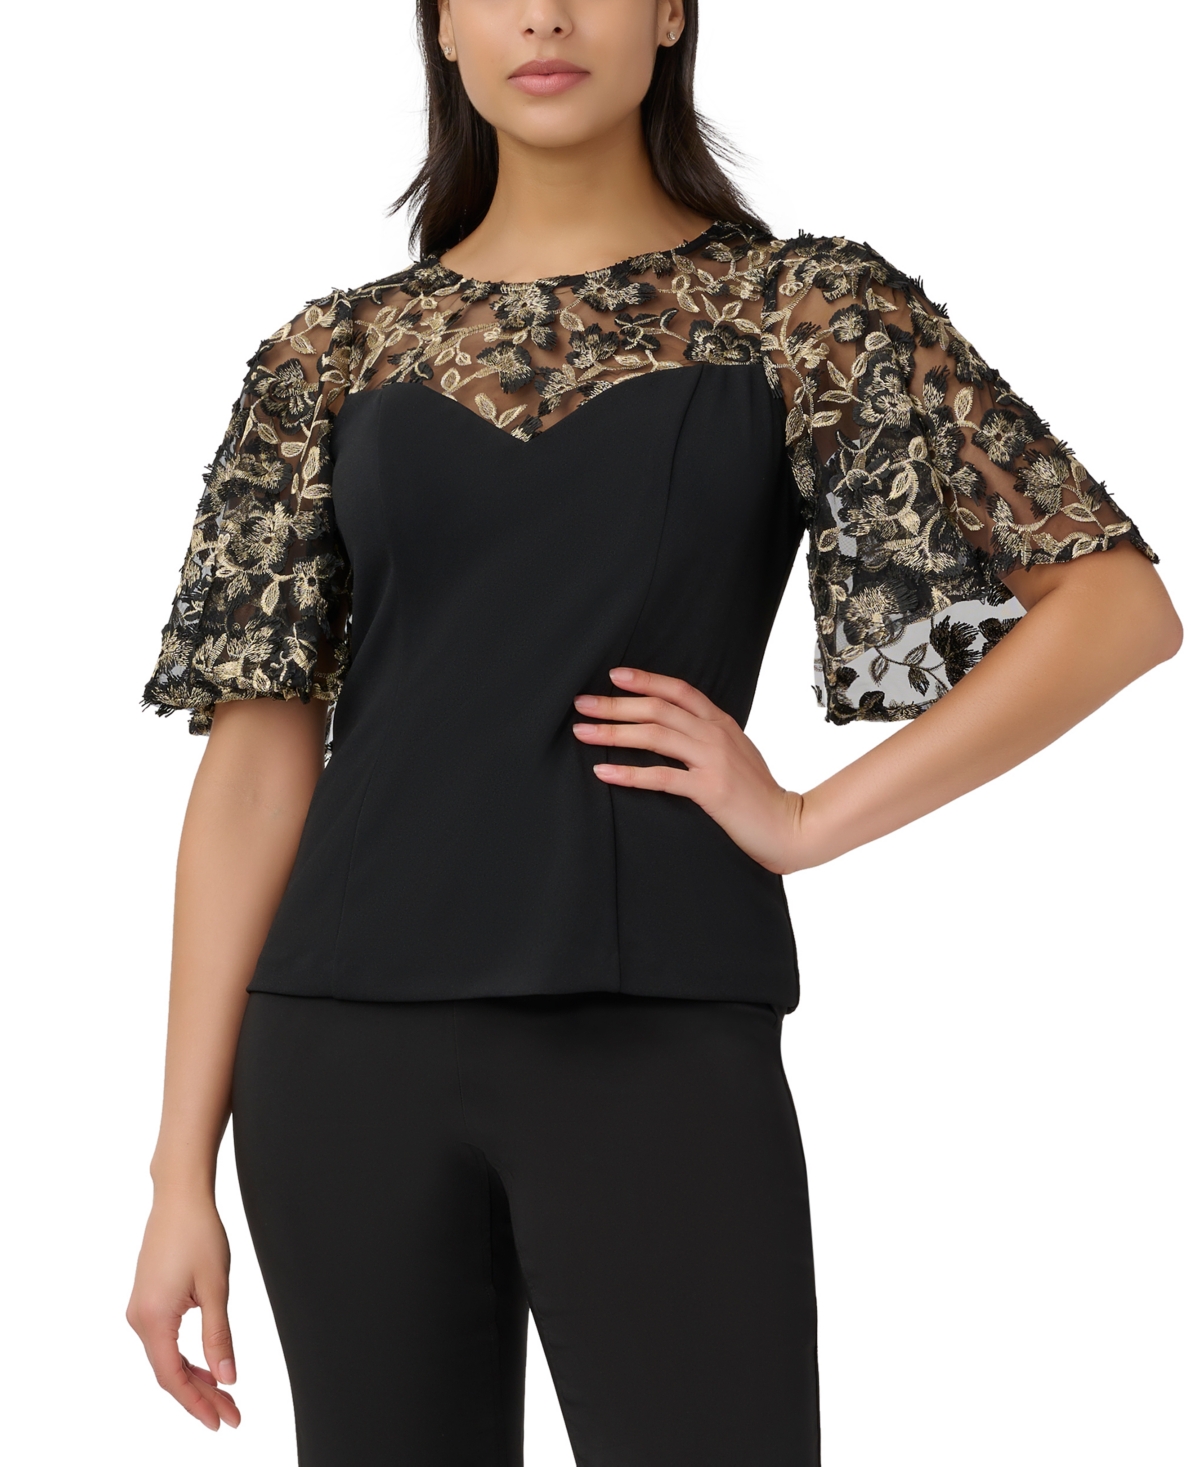  Adrianna Papell Embroidered Illusion Top